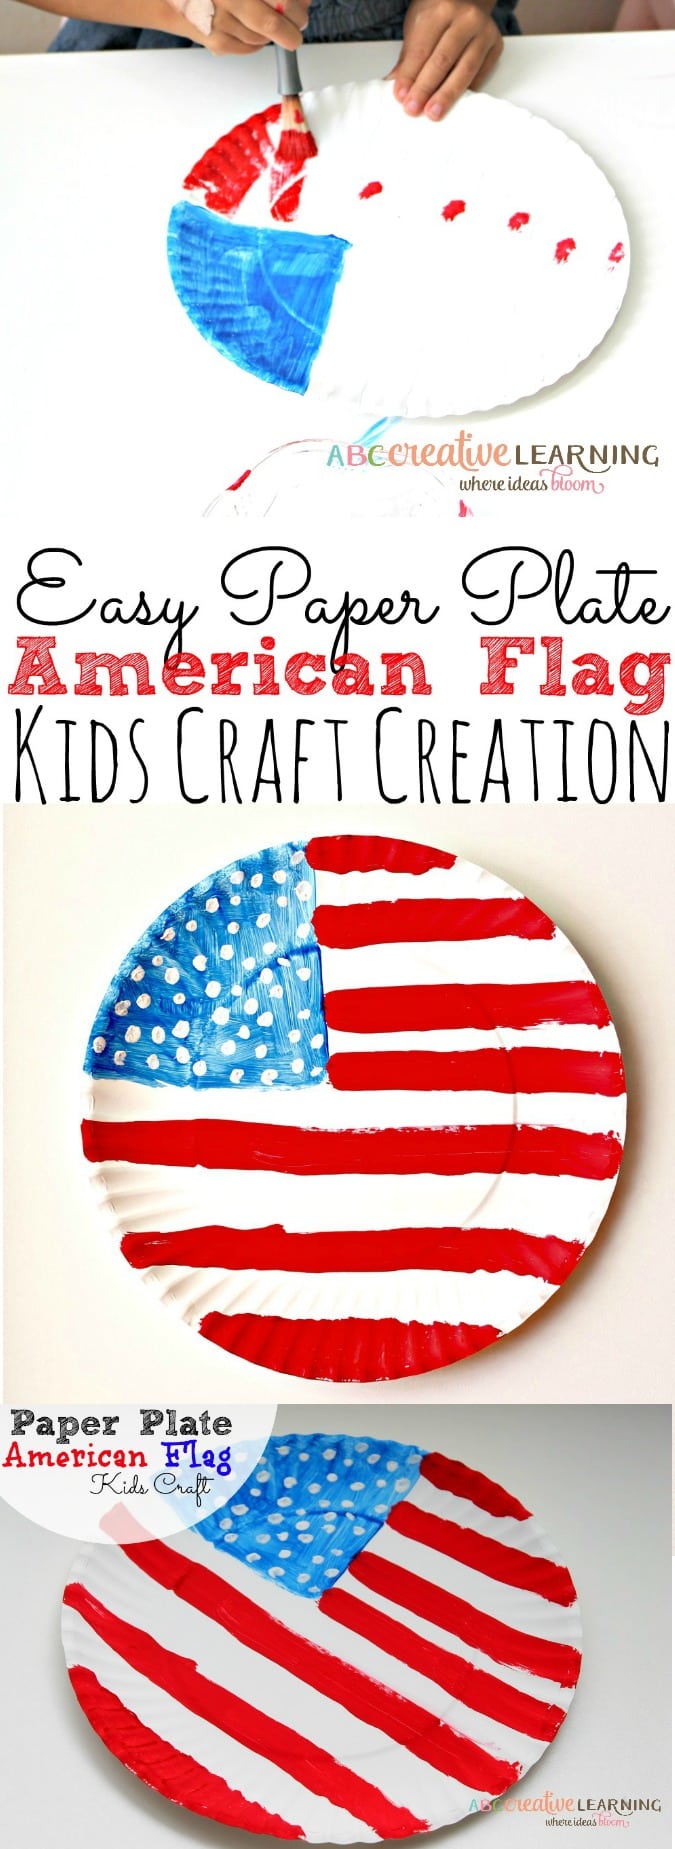 Paper Plate American Flag Craft